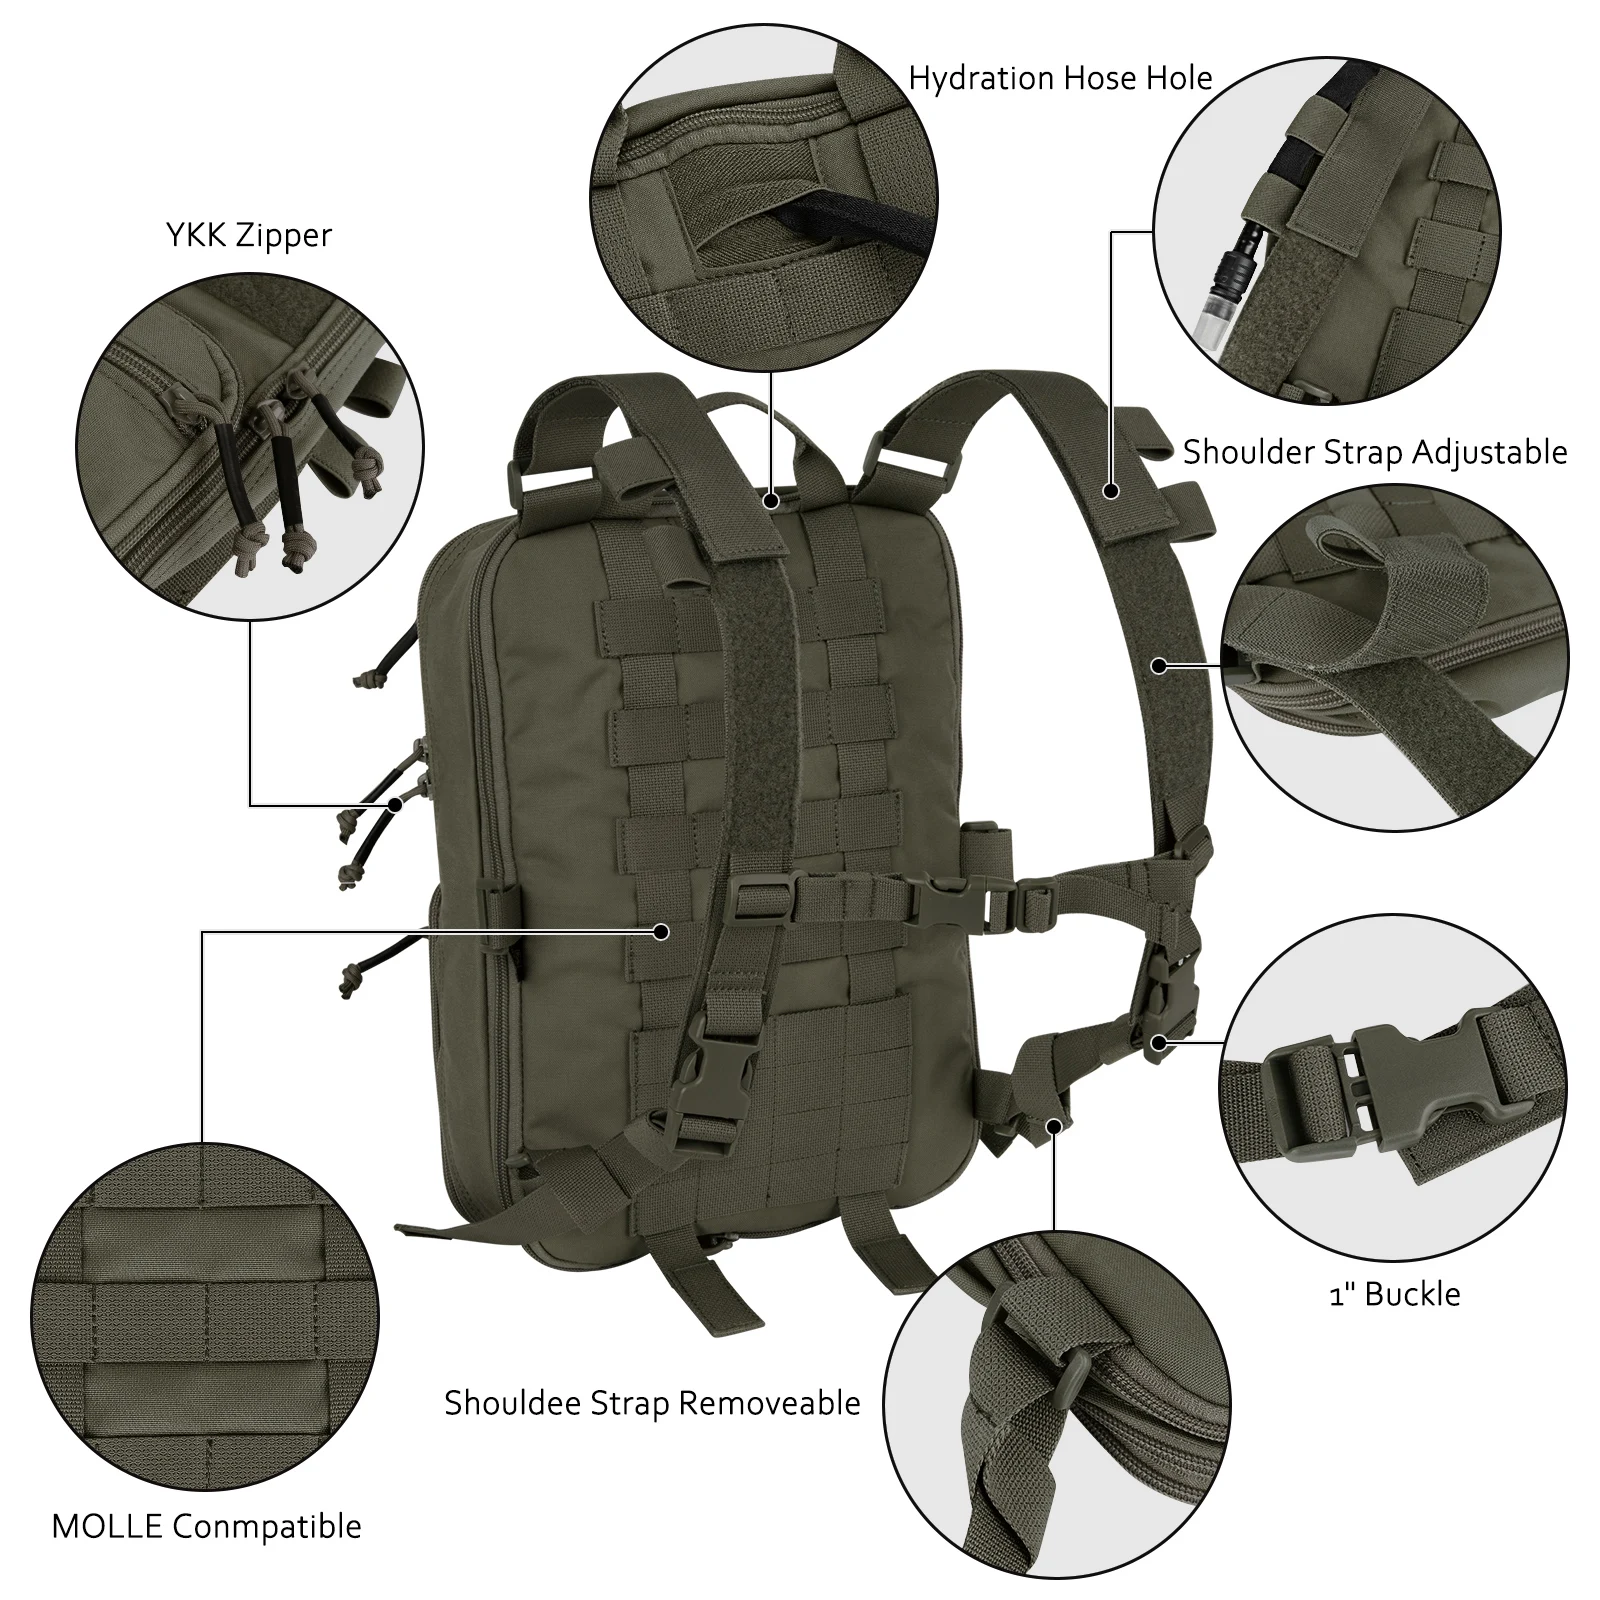 KRYDEX Tactical Flatpack D3 Backpack Bag with D3CR Chest Rig Vest Rifle AK M4 Pistol Magazine Pouch Hunting Outdoor Hiking Gear